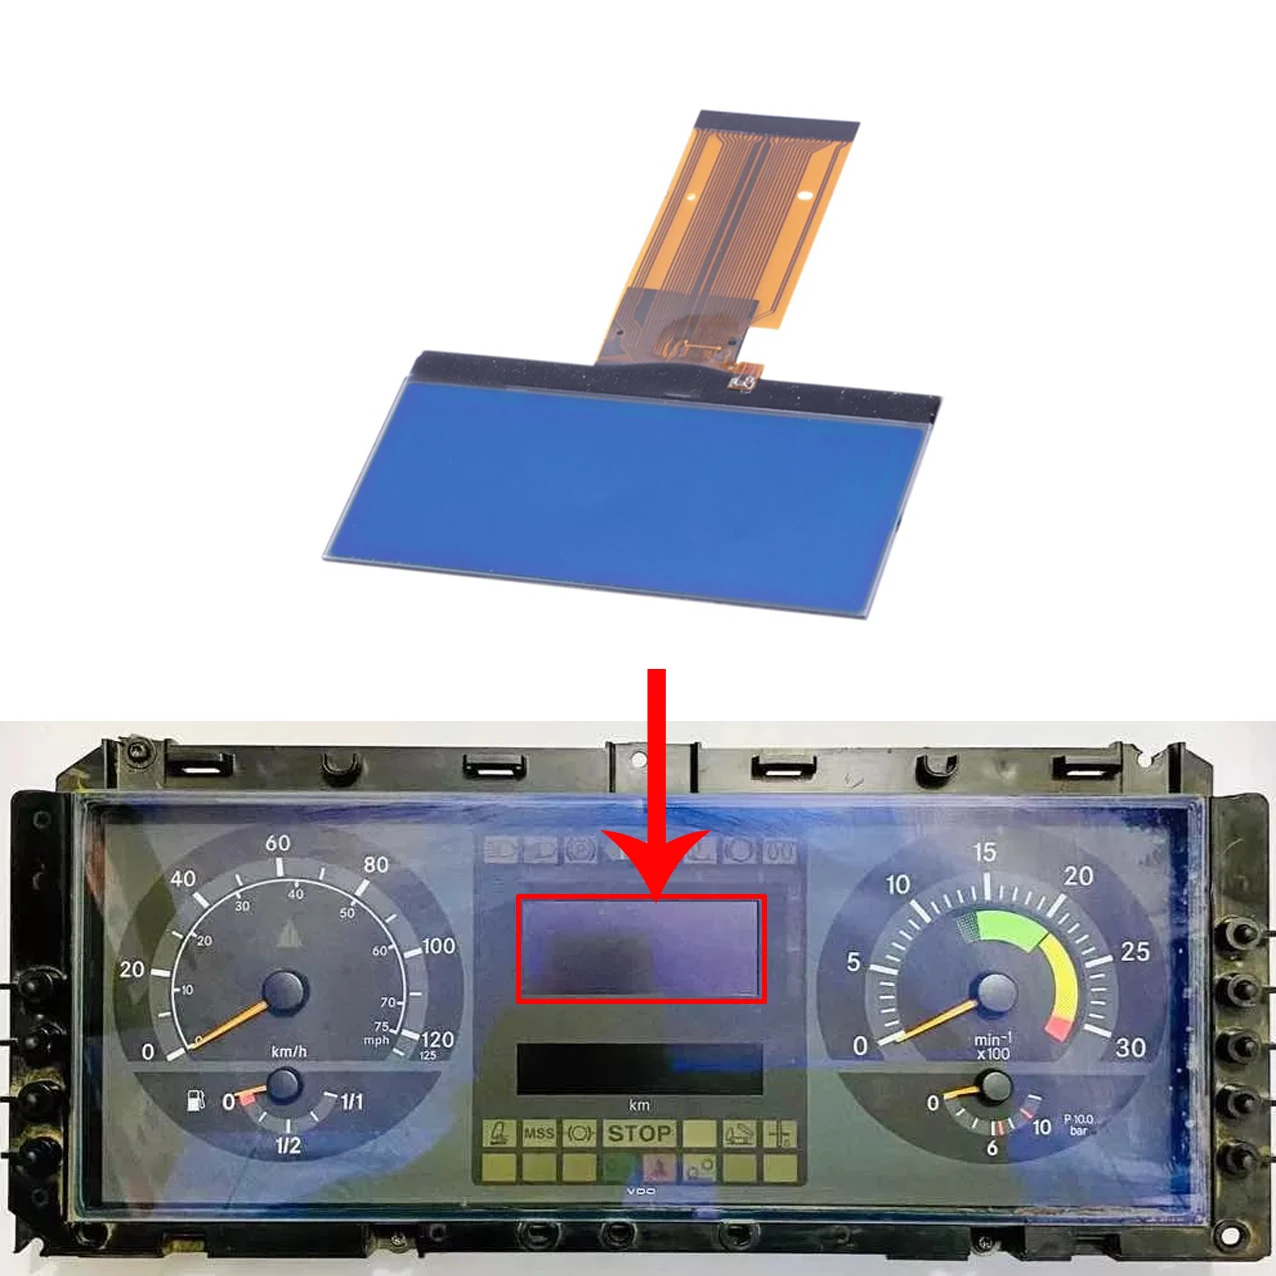 

Car LCD Display Sn VDO A9584460521 for Mercedes Benz Mb 1933 axor atego Instrument Cluster Pixel Repair